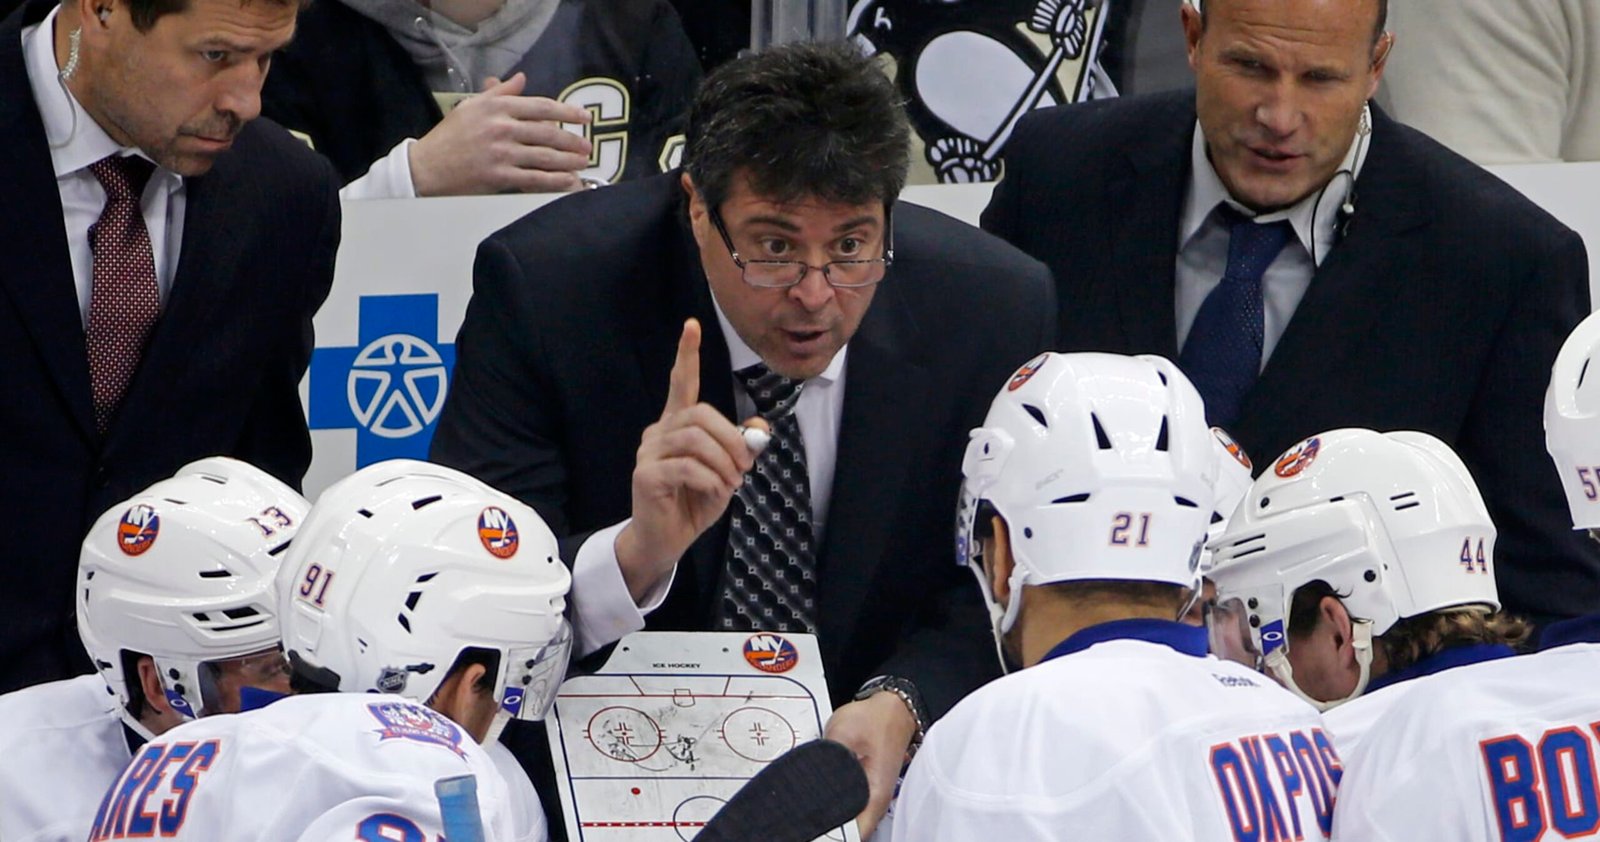 Greg Cronin Hired as Ducks Head Coach; Has 12 Years of Skills as NHL Assistant